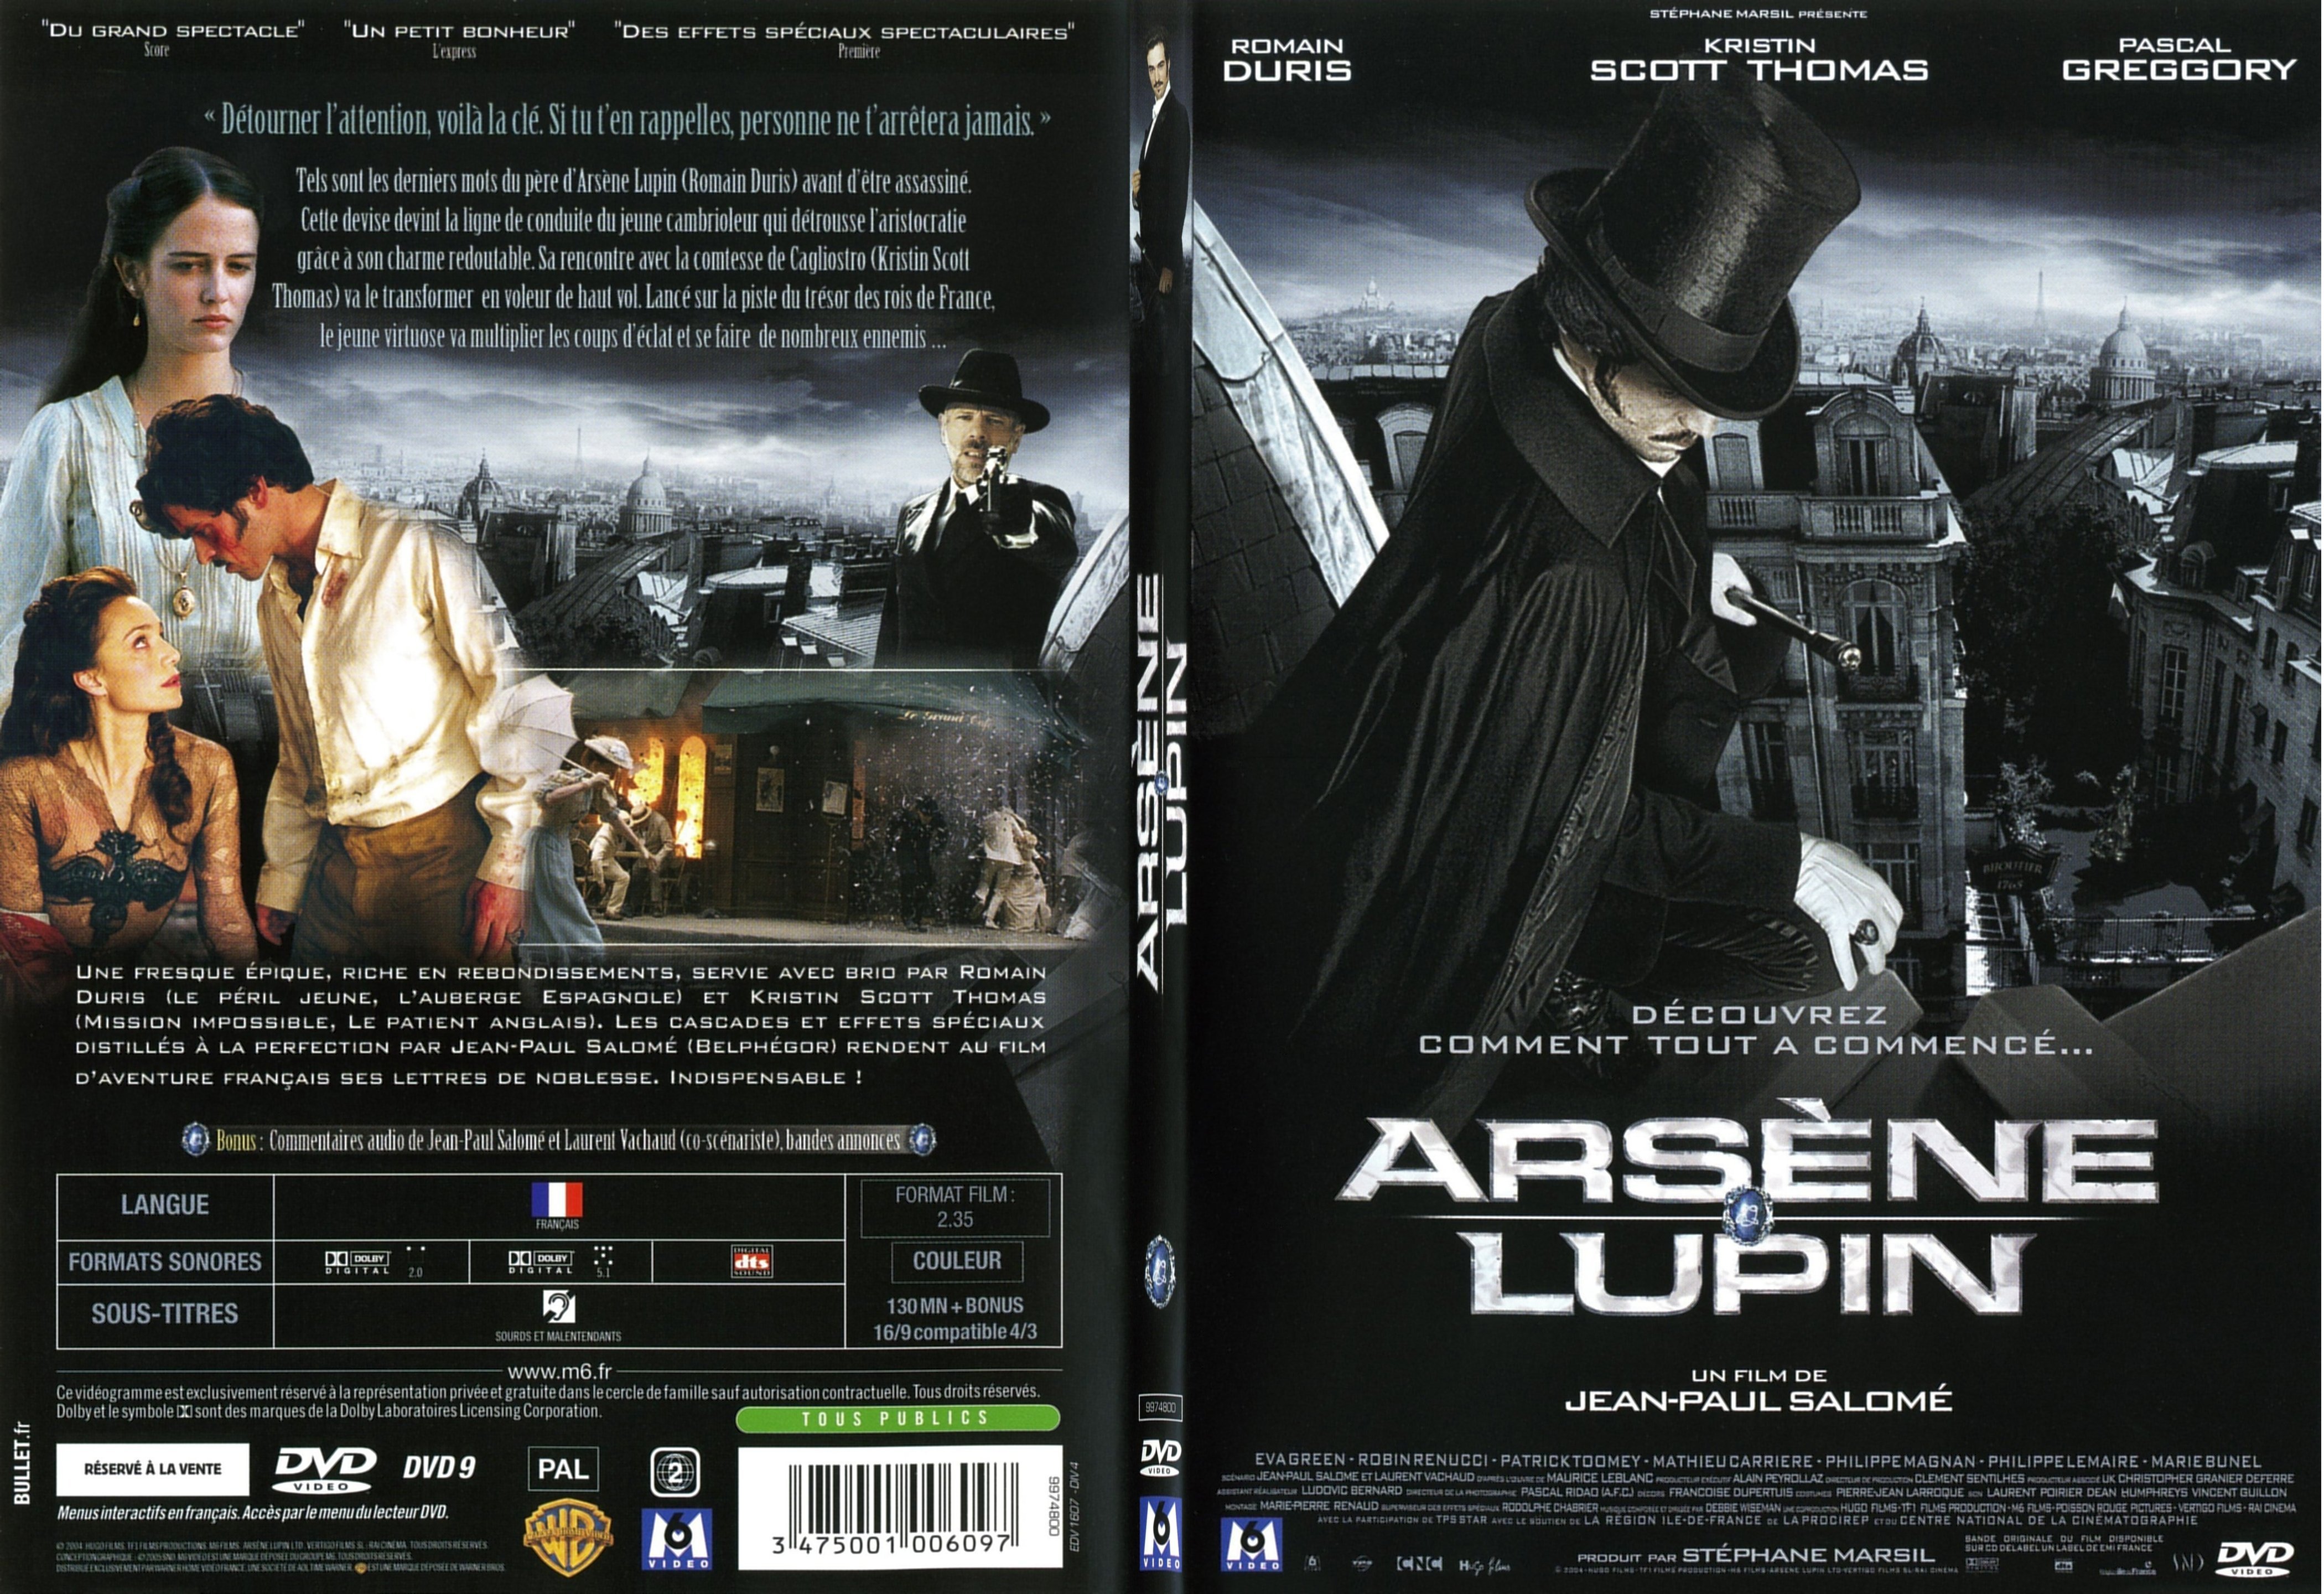 Jaquette DVD Arsne Lupin - SLIM